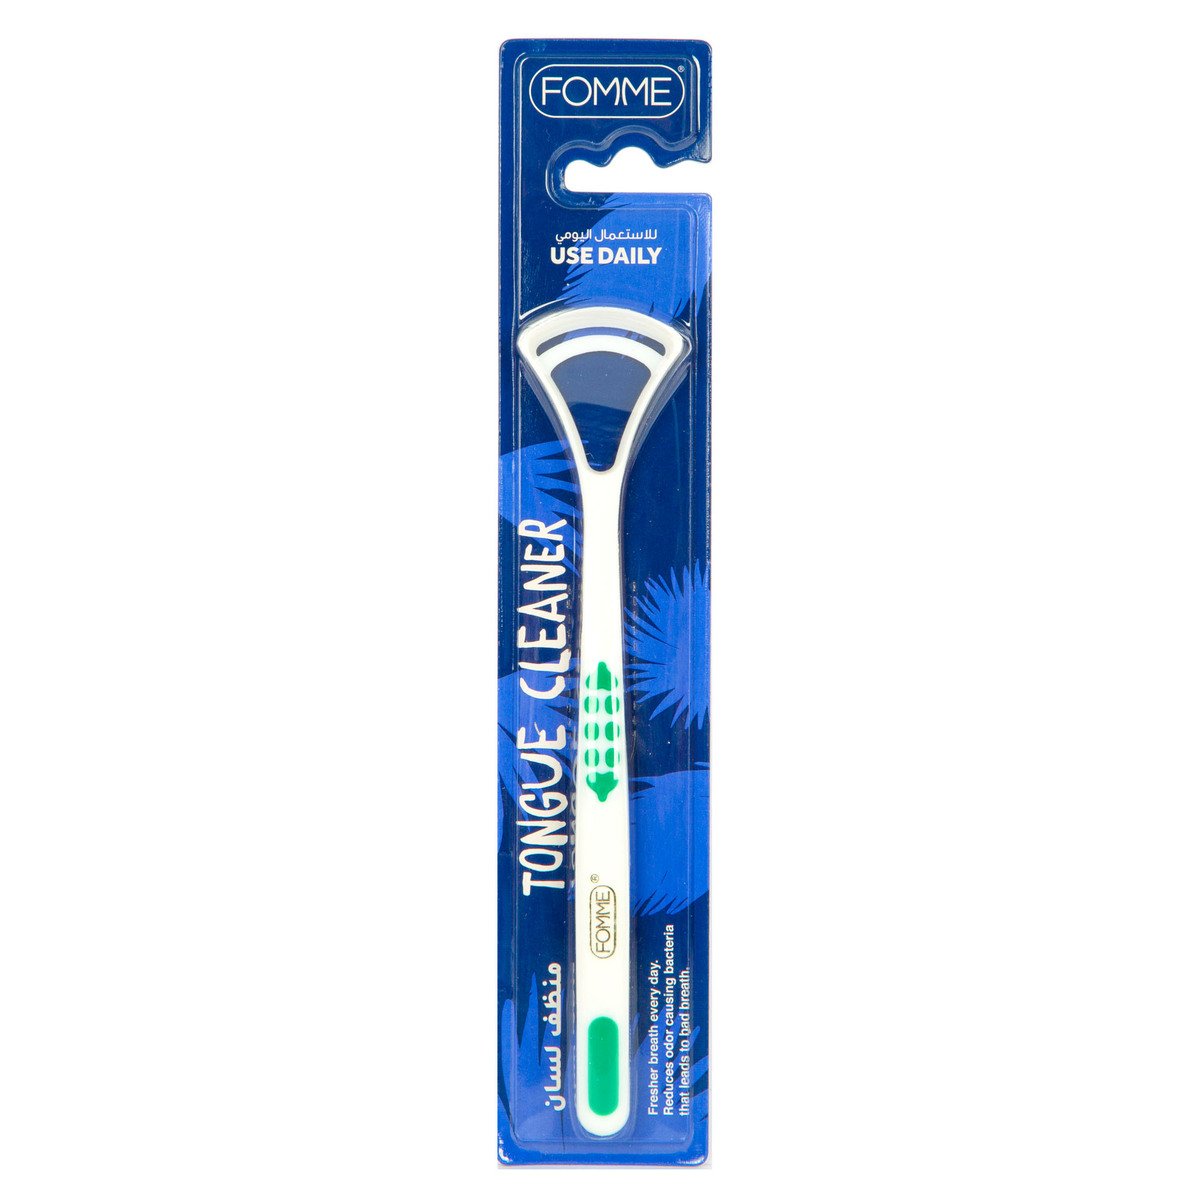 Fomme Tongue Cleaner 1pc